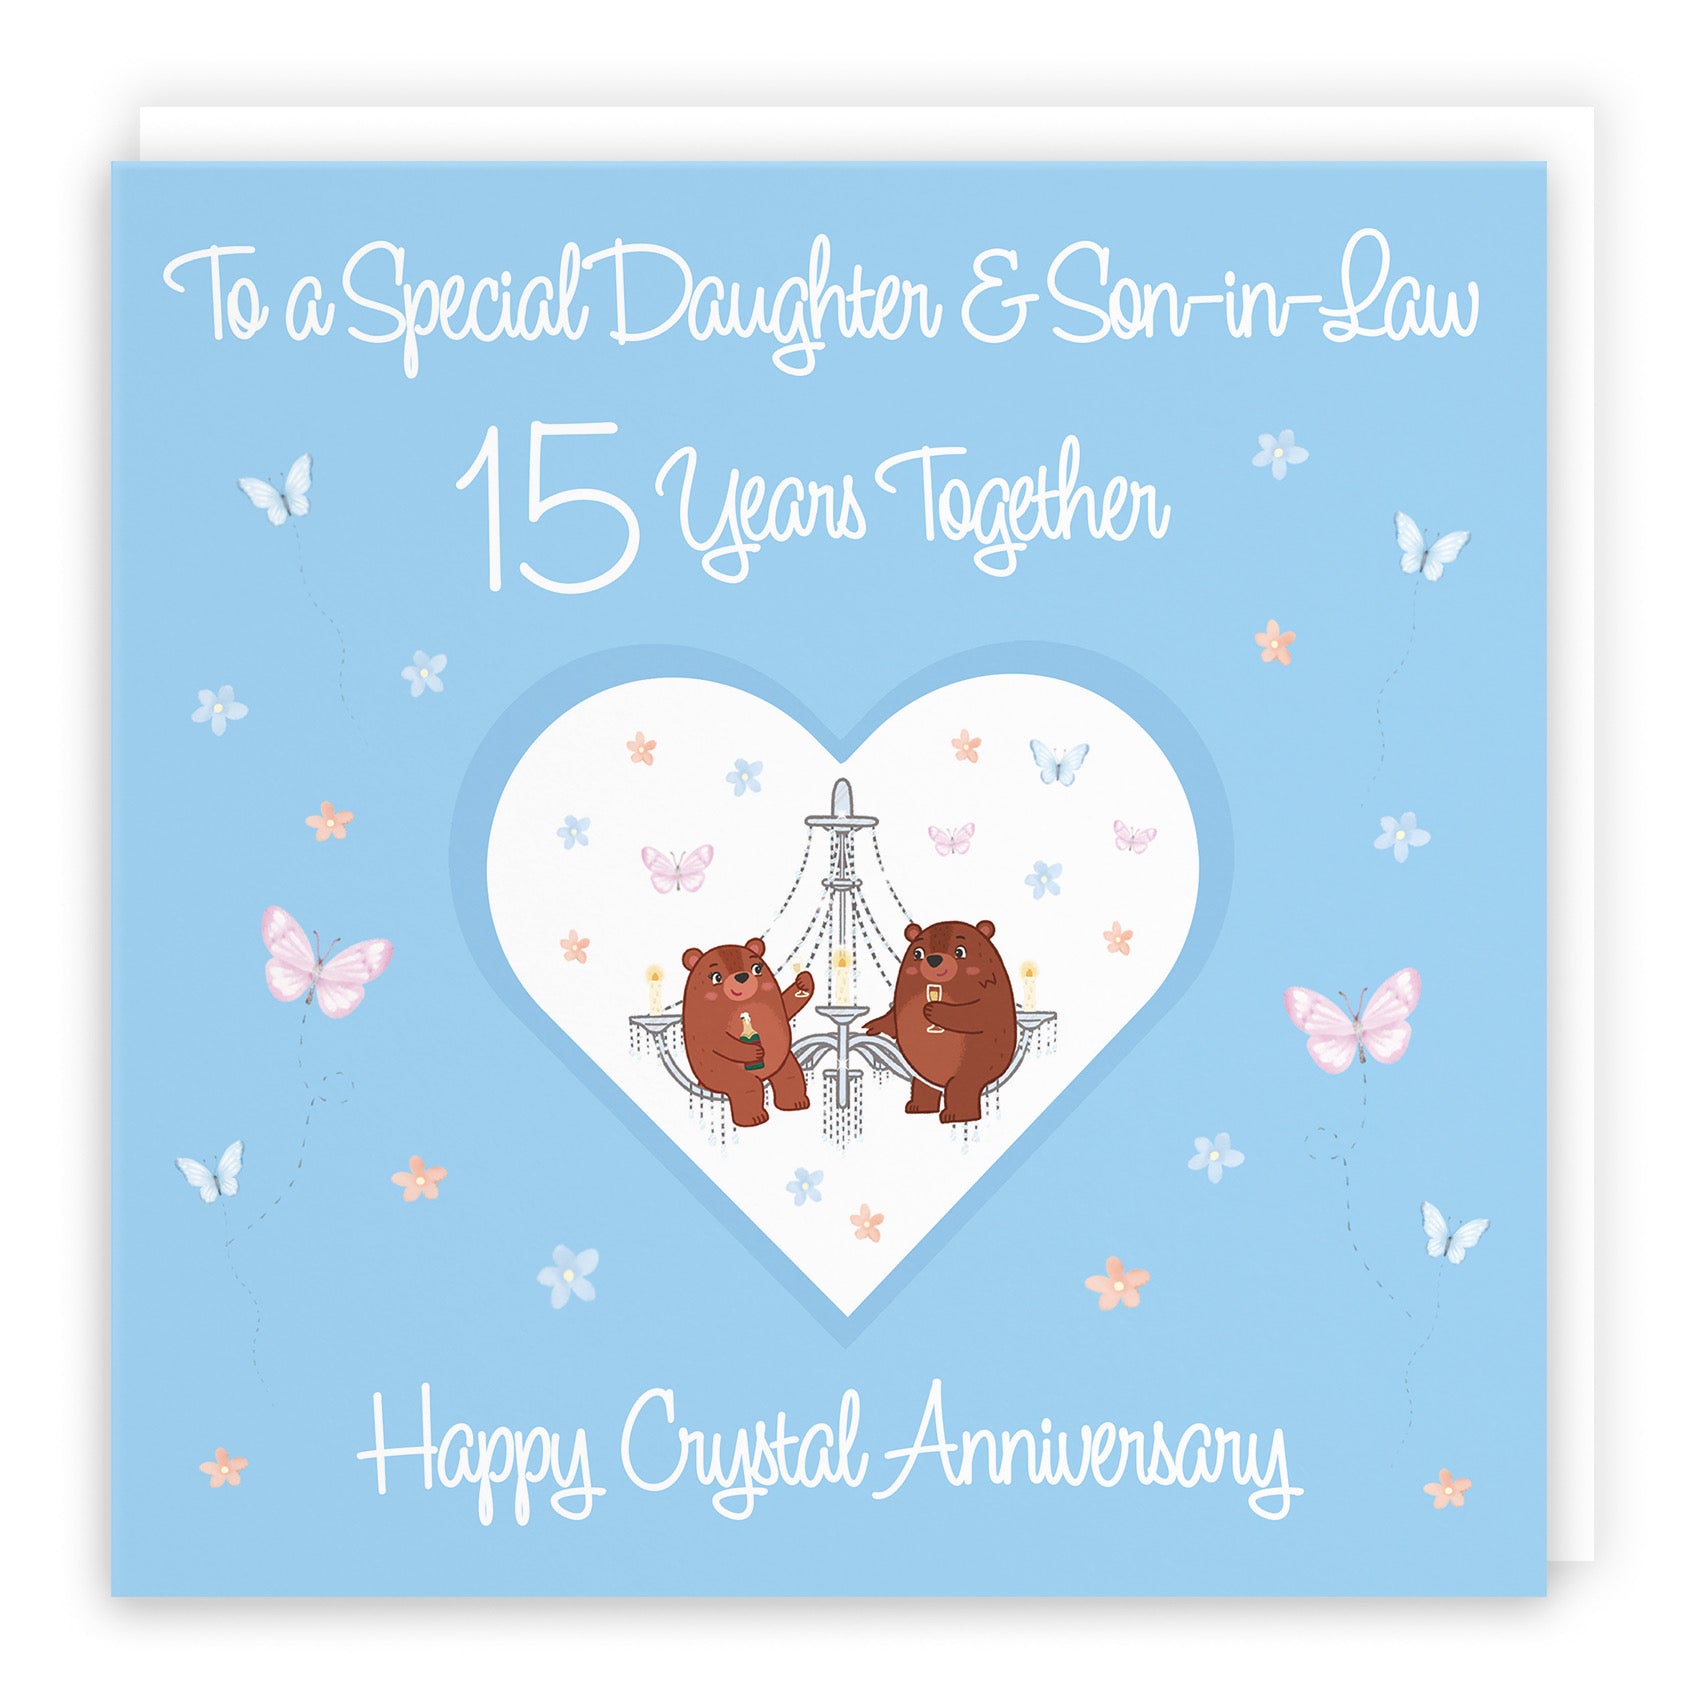 Large Daughter & Son-in-Law 15th Anniversary Card Romantic Meadows - Default Title (B0CXY5RPPM)